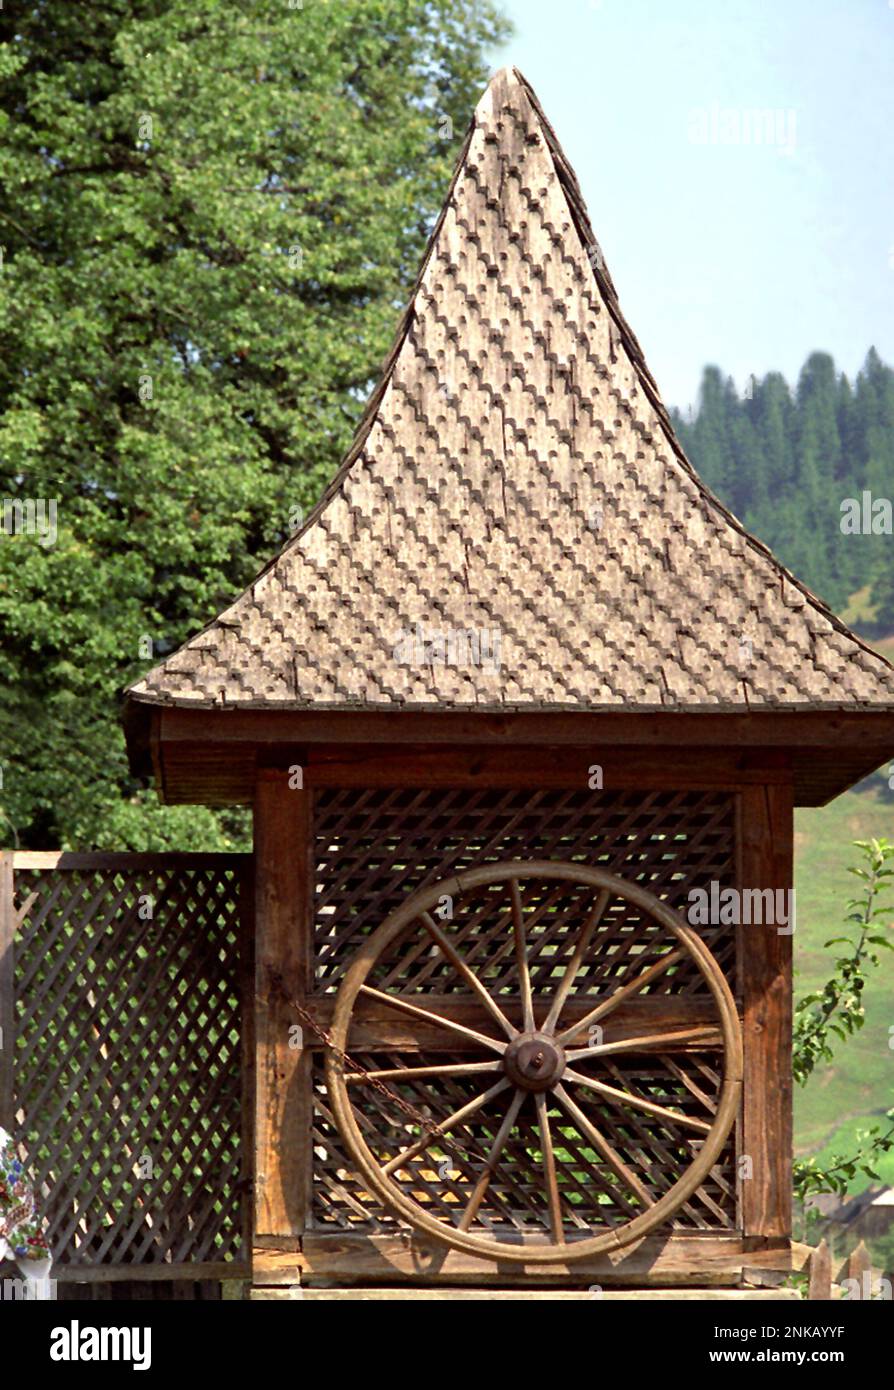 Straja, Suceava County, Romania, 1998. A beautiful water well with wheel and wooden outside structure. Stock Photo